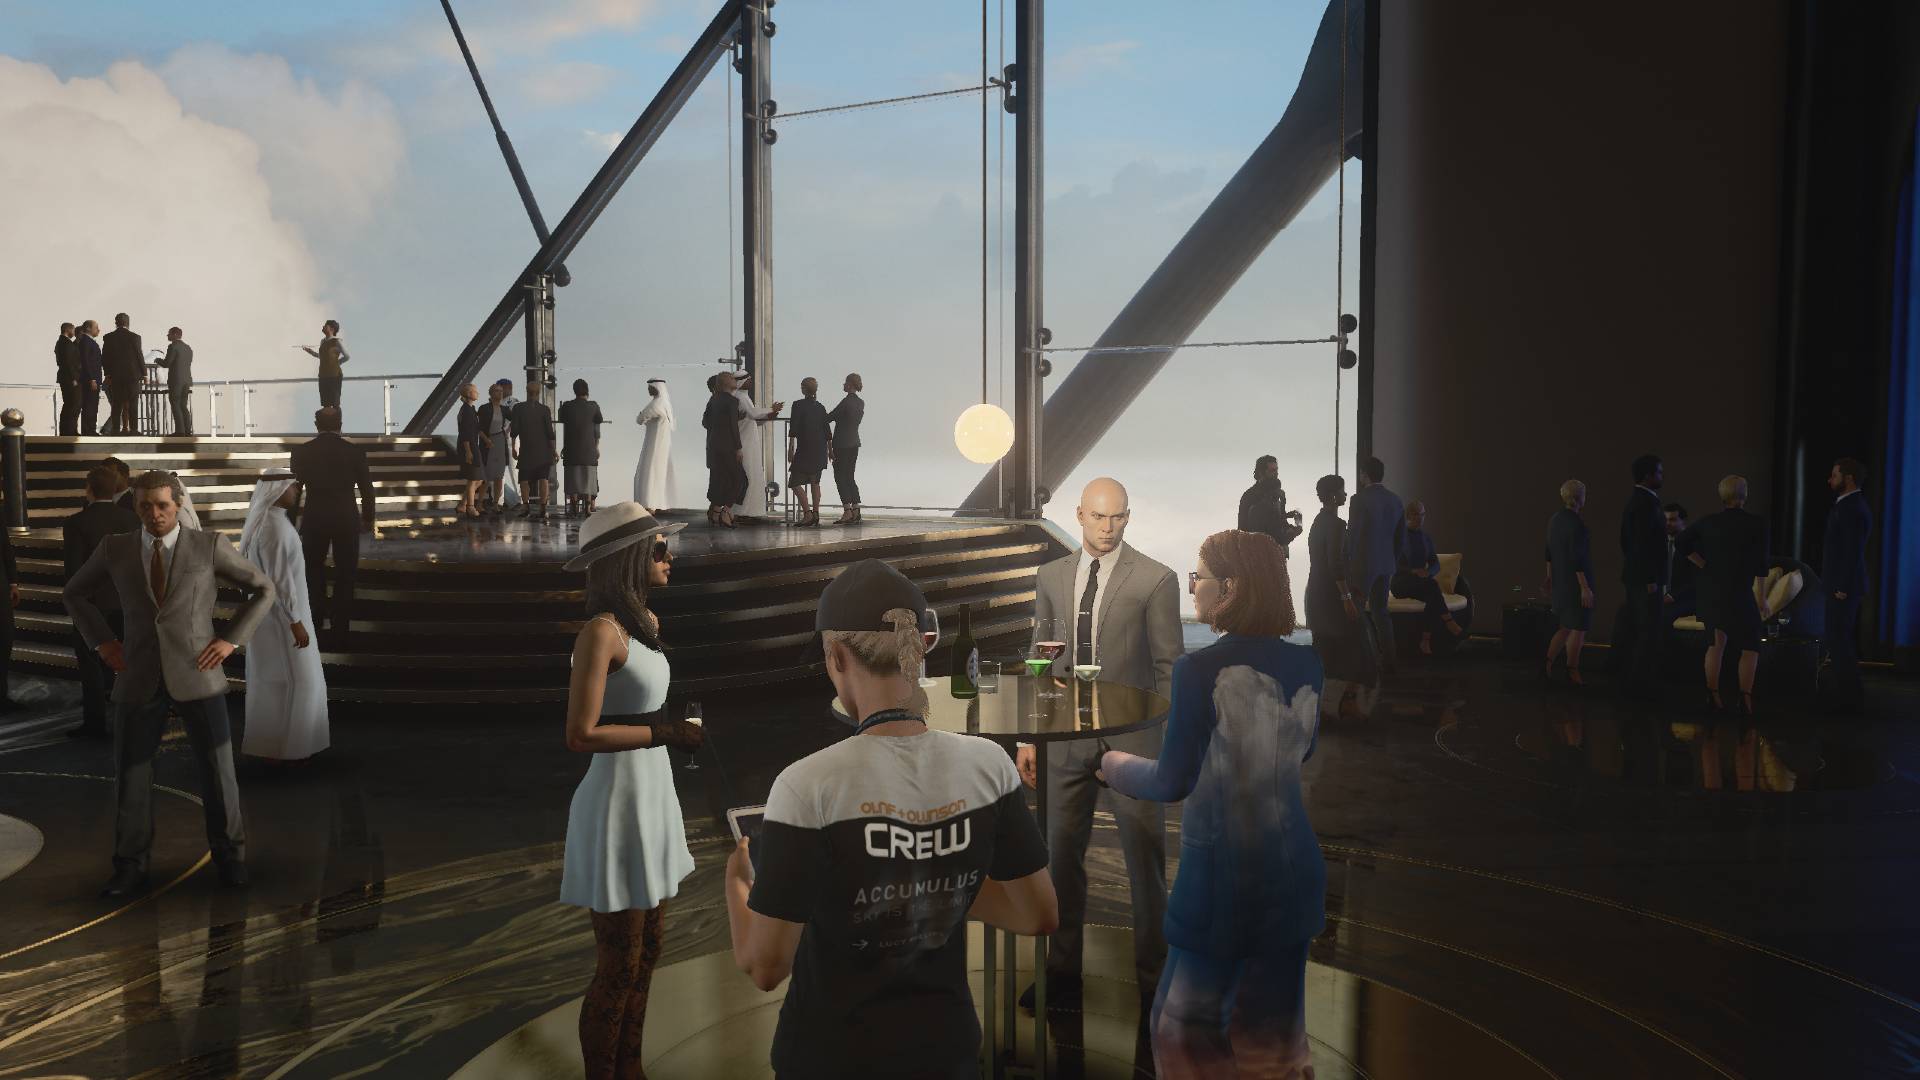 Hitman 3' Dubai mission is free to play for a limited time